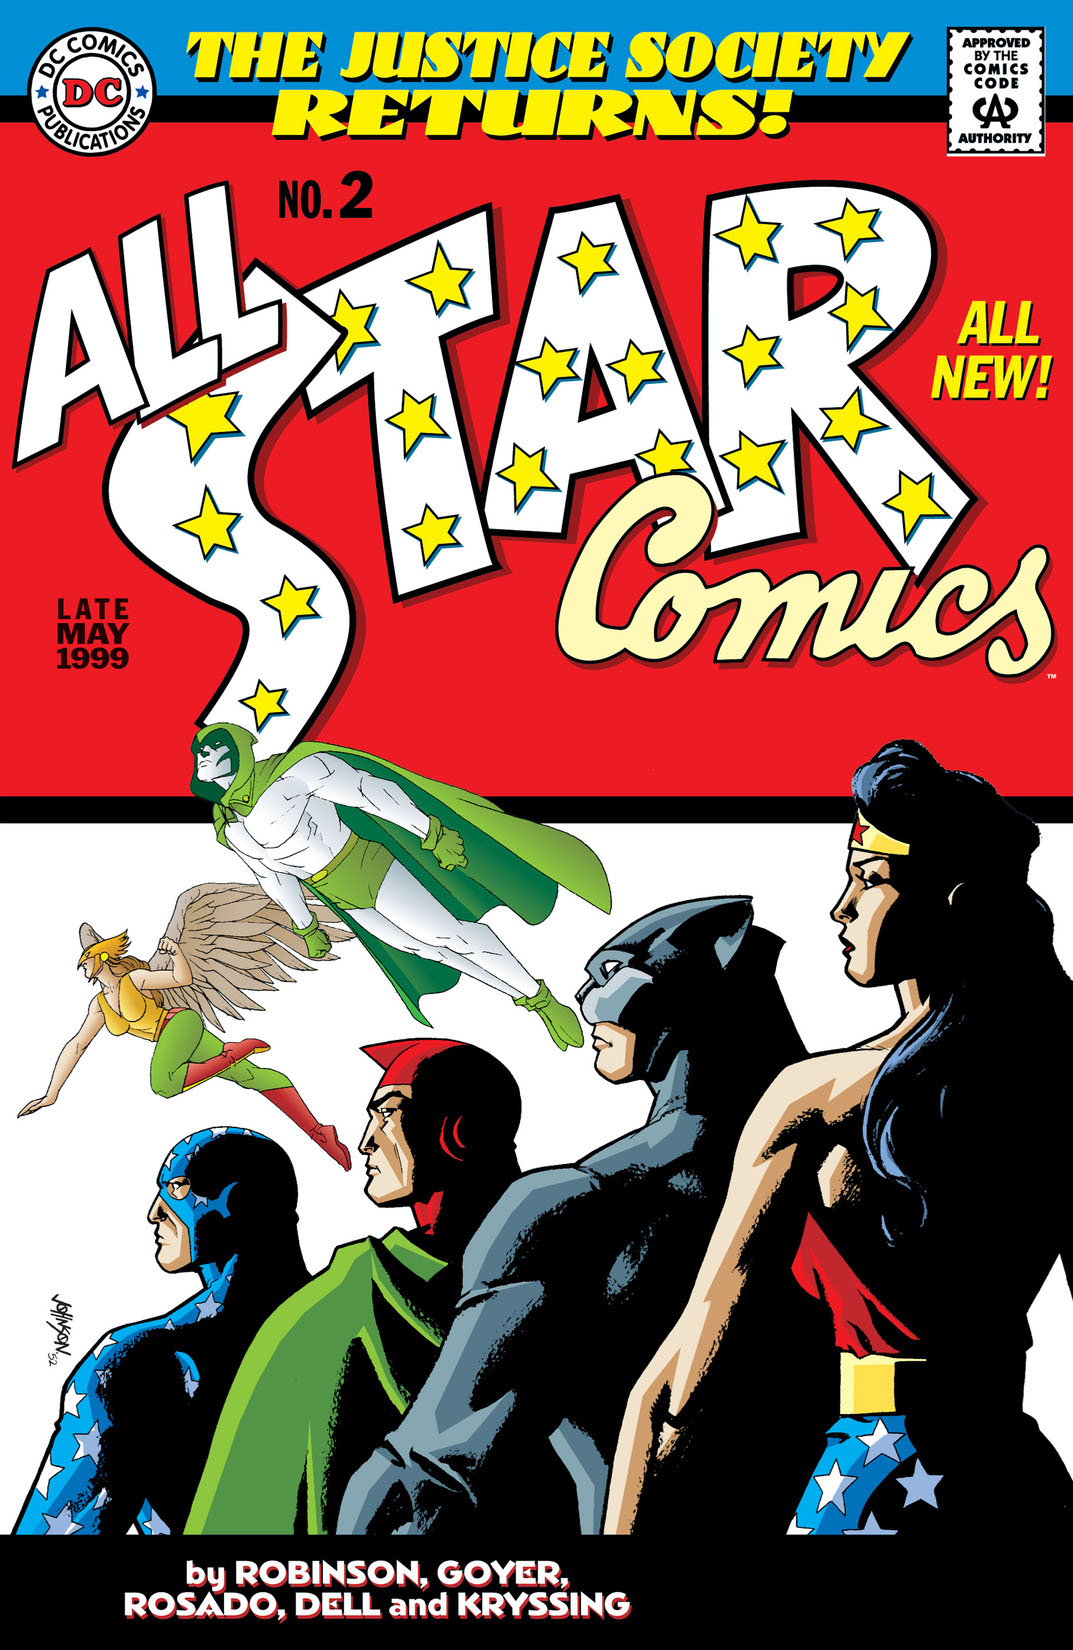 All Star Comics #2 preview images